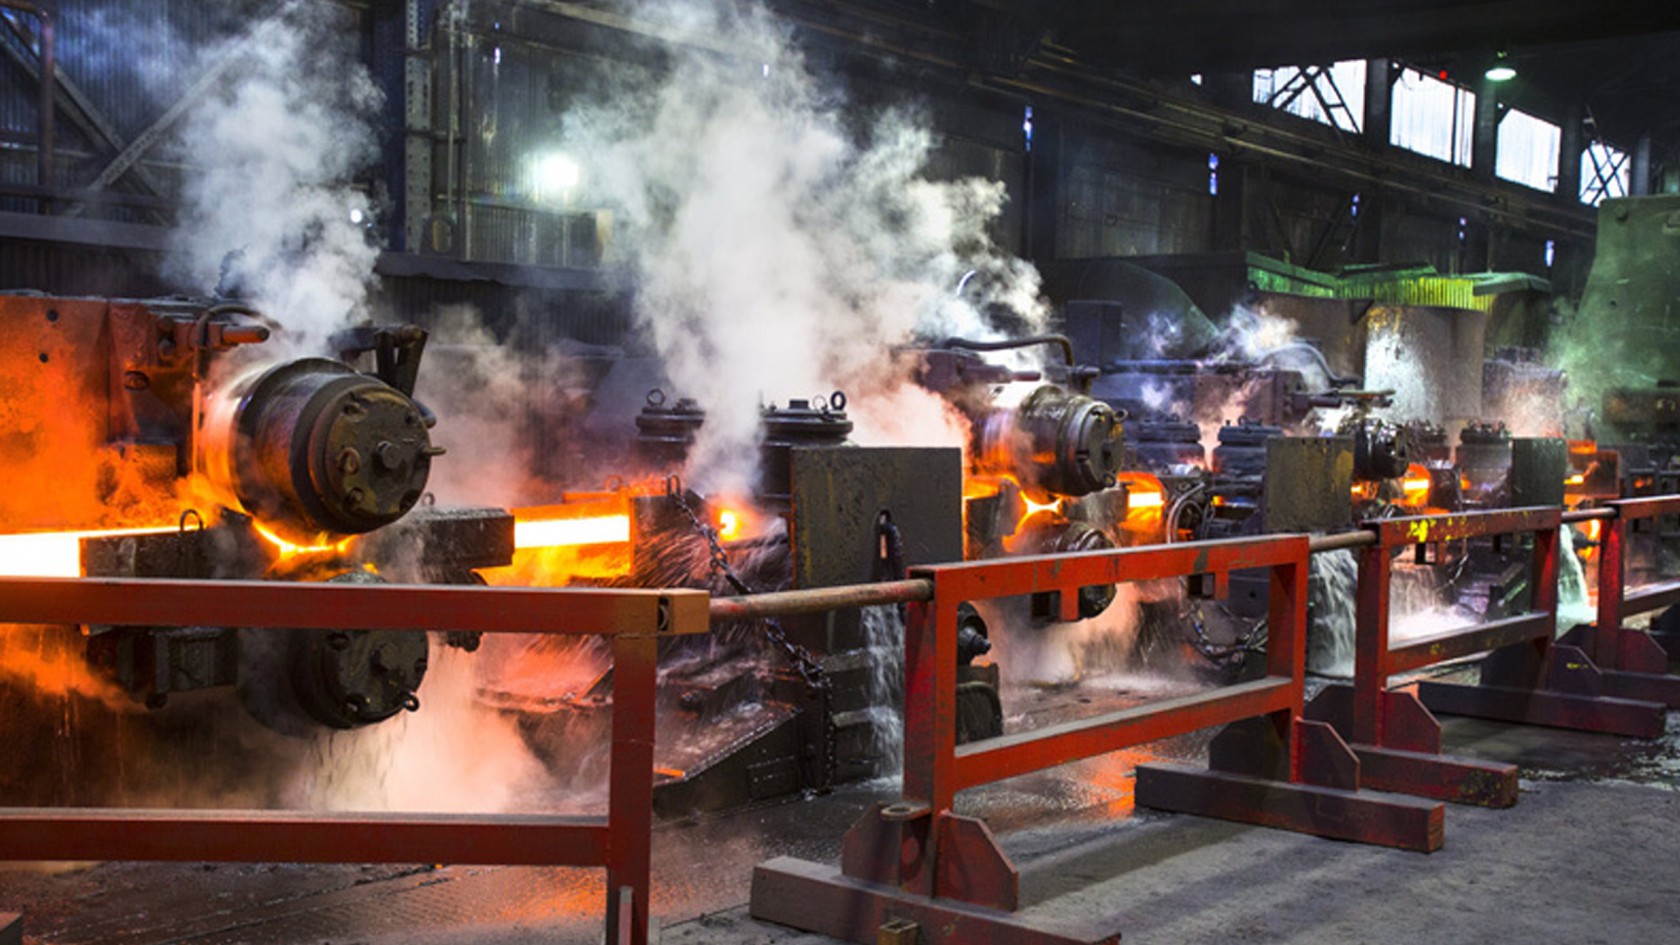 A Visit to the NUCOR Steel Plant Board & Vellum